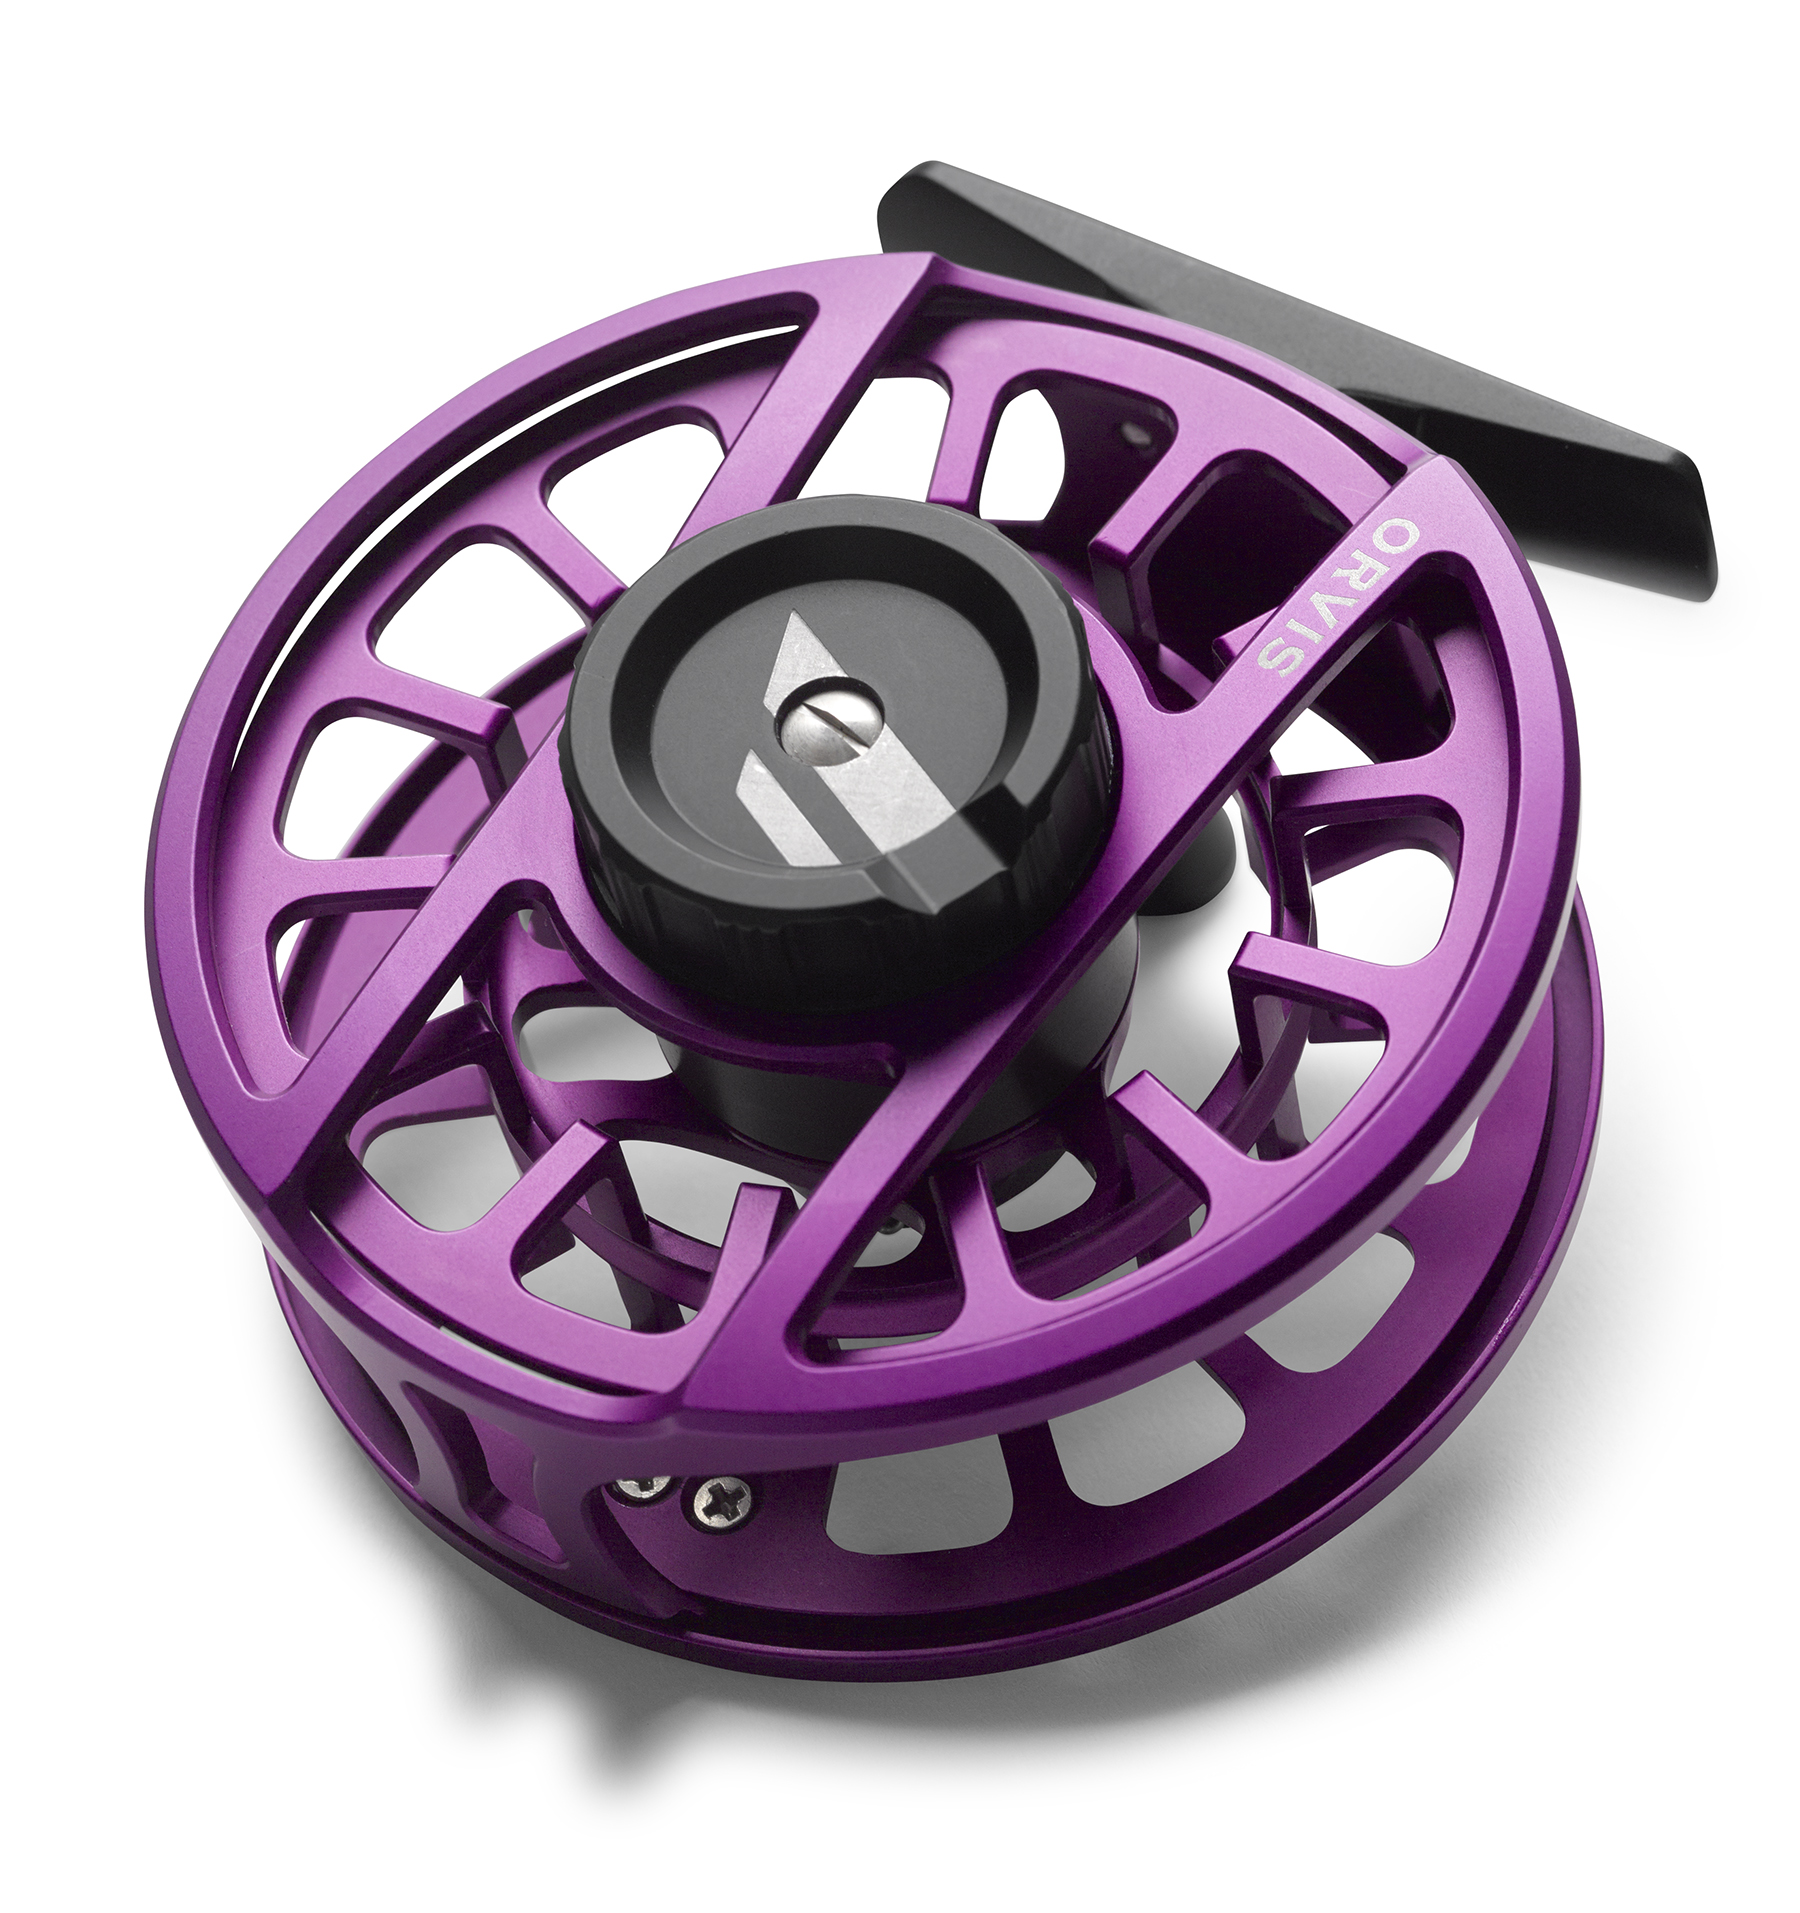 Orvis Hydros Fly Reel - The Bent Rod